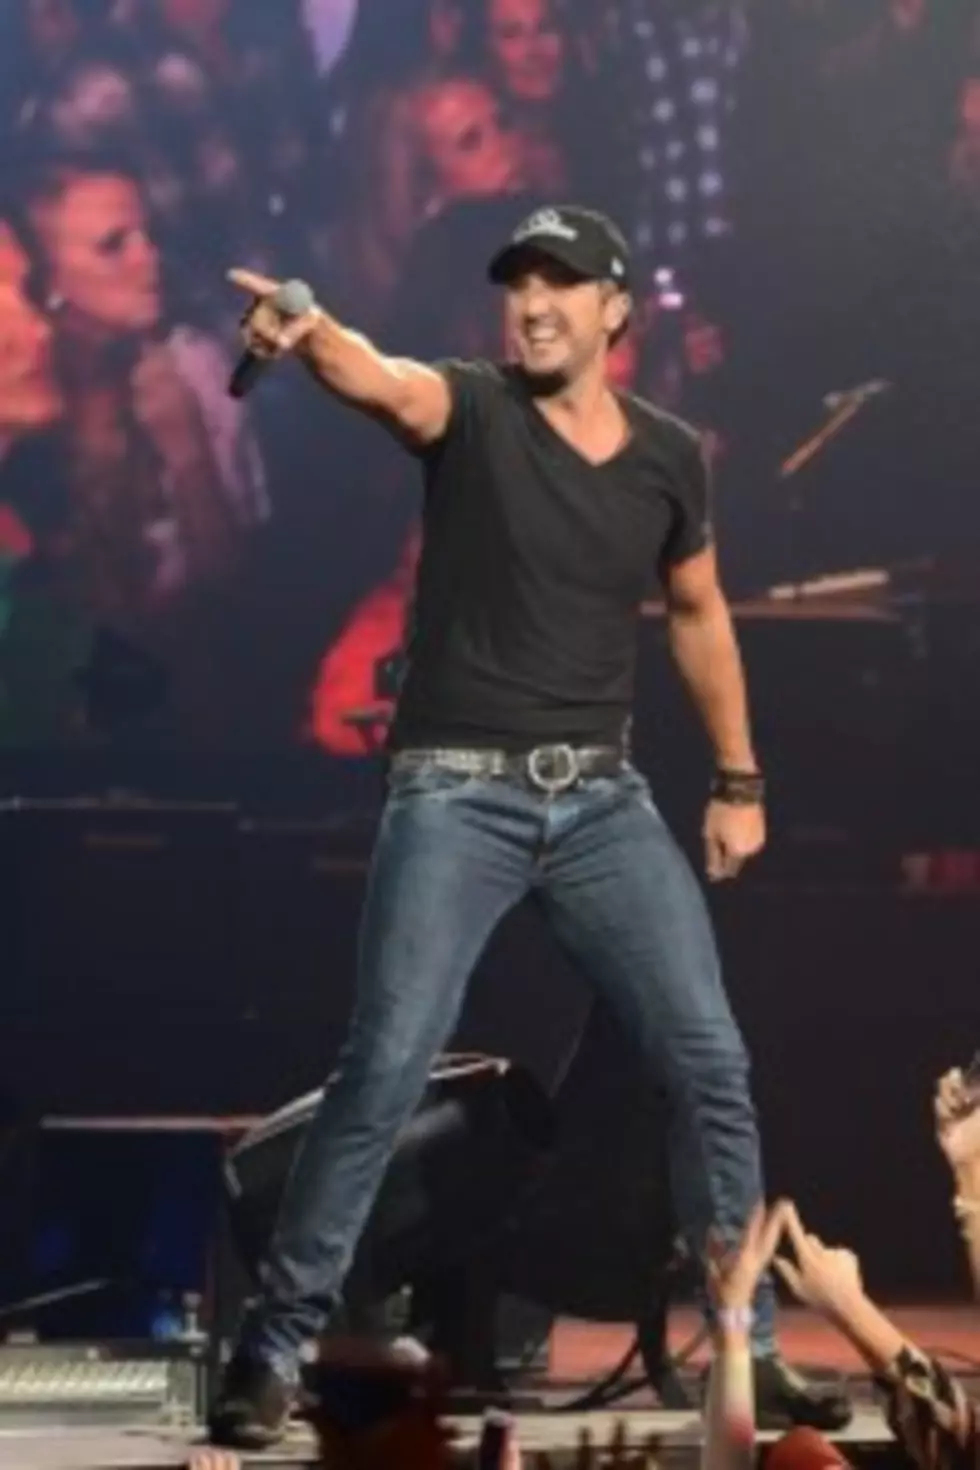 Luke Bryan, Lee Brice Pre-Sale Tickets Available Here